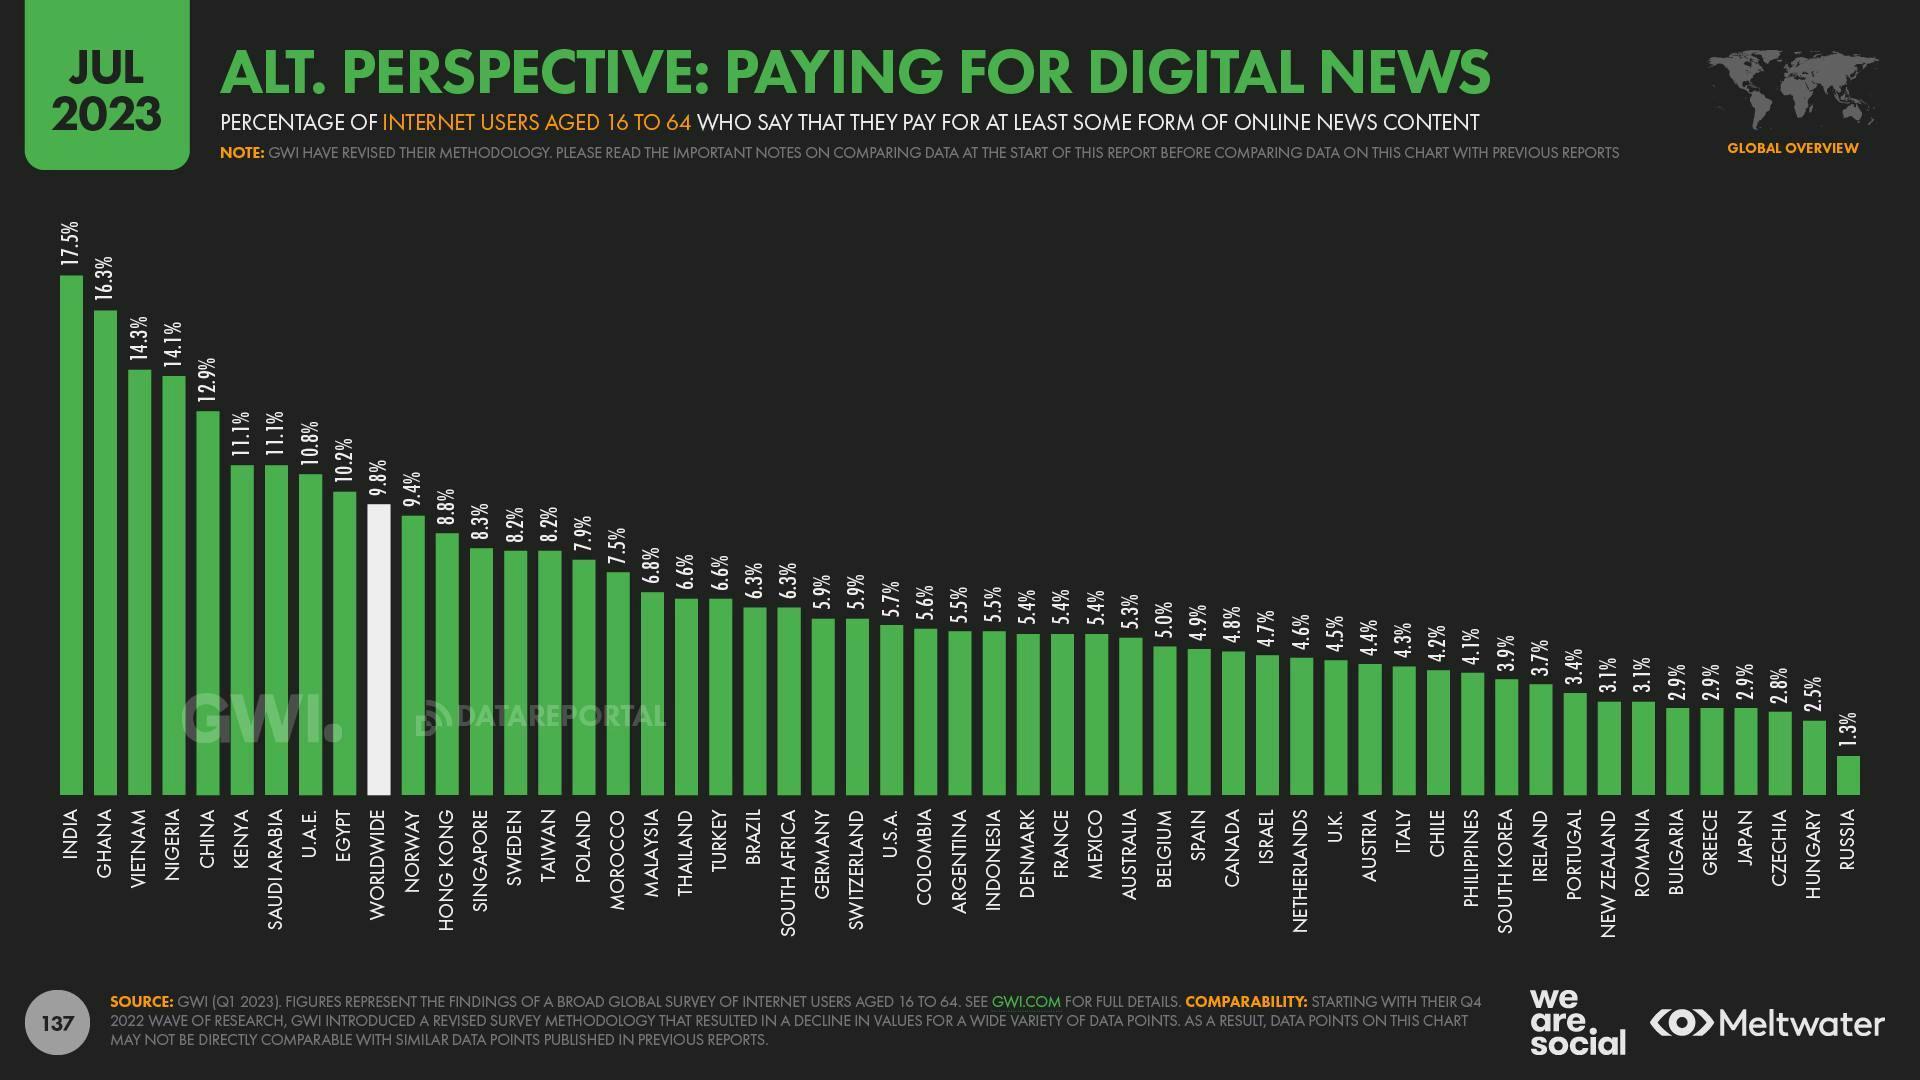 A bar chart of the percentage of people across nations who pay for news, according to GWI survey data. 